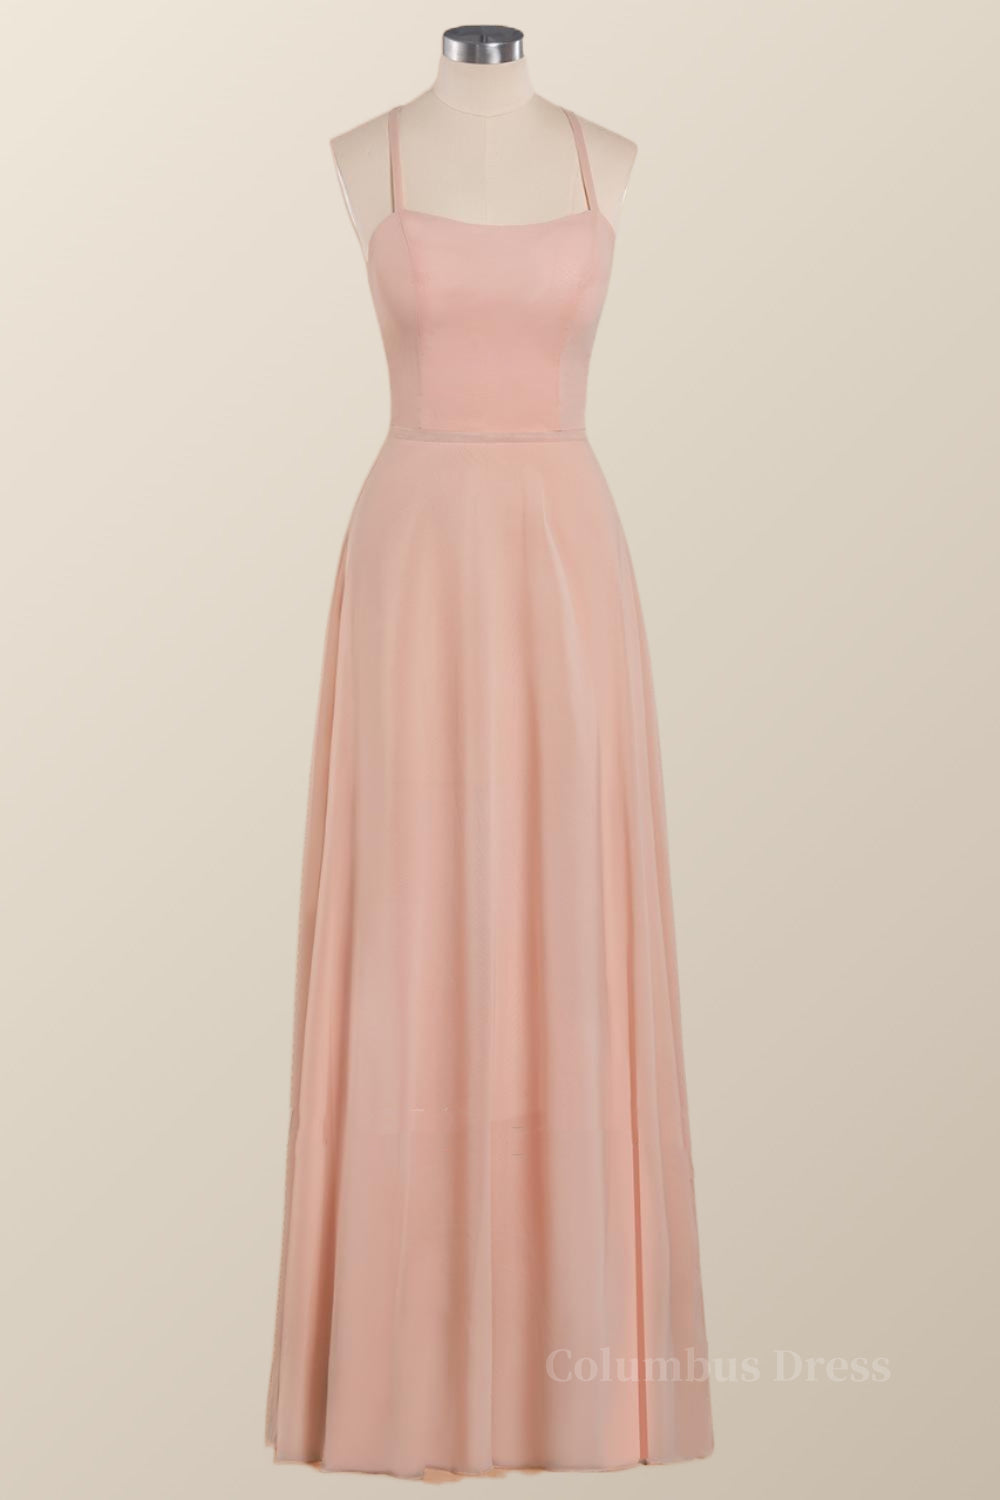 Princess Pink Straps Chiffon A-line Long Corset Bridesmaid Dress outfit, Formal Dresses For Middle School